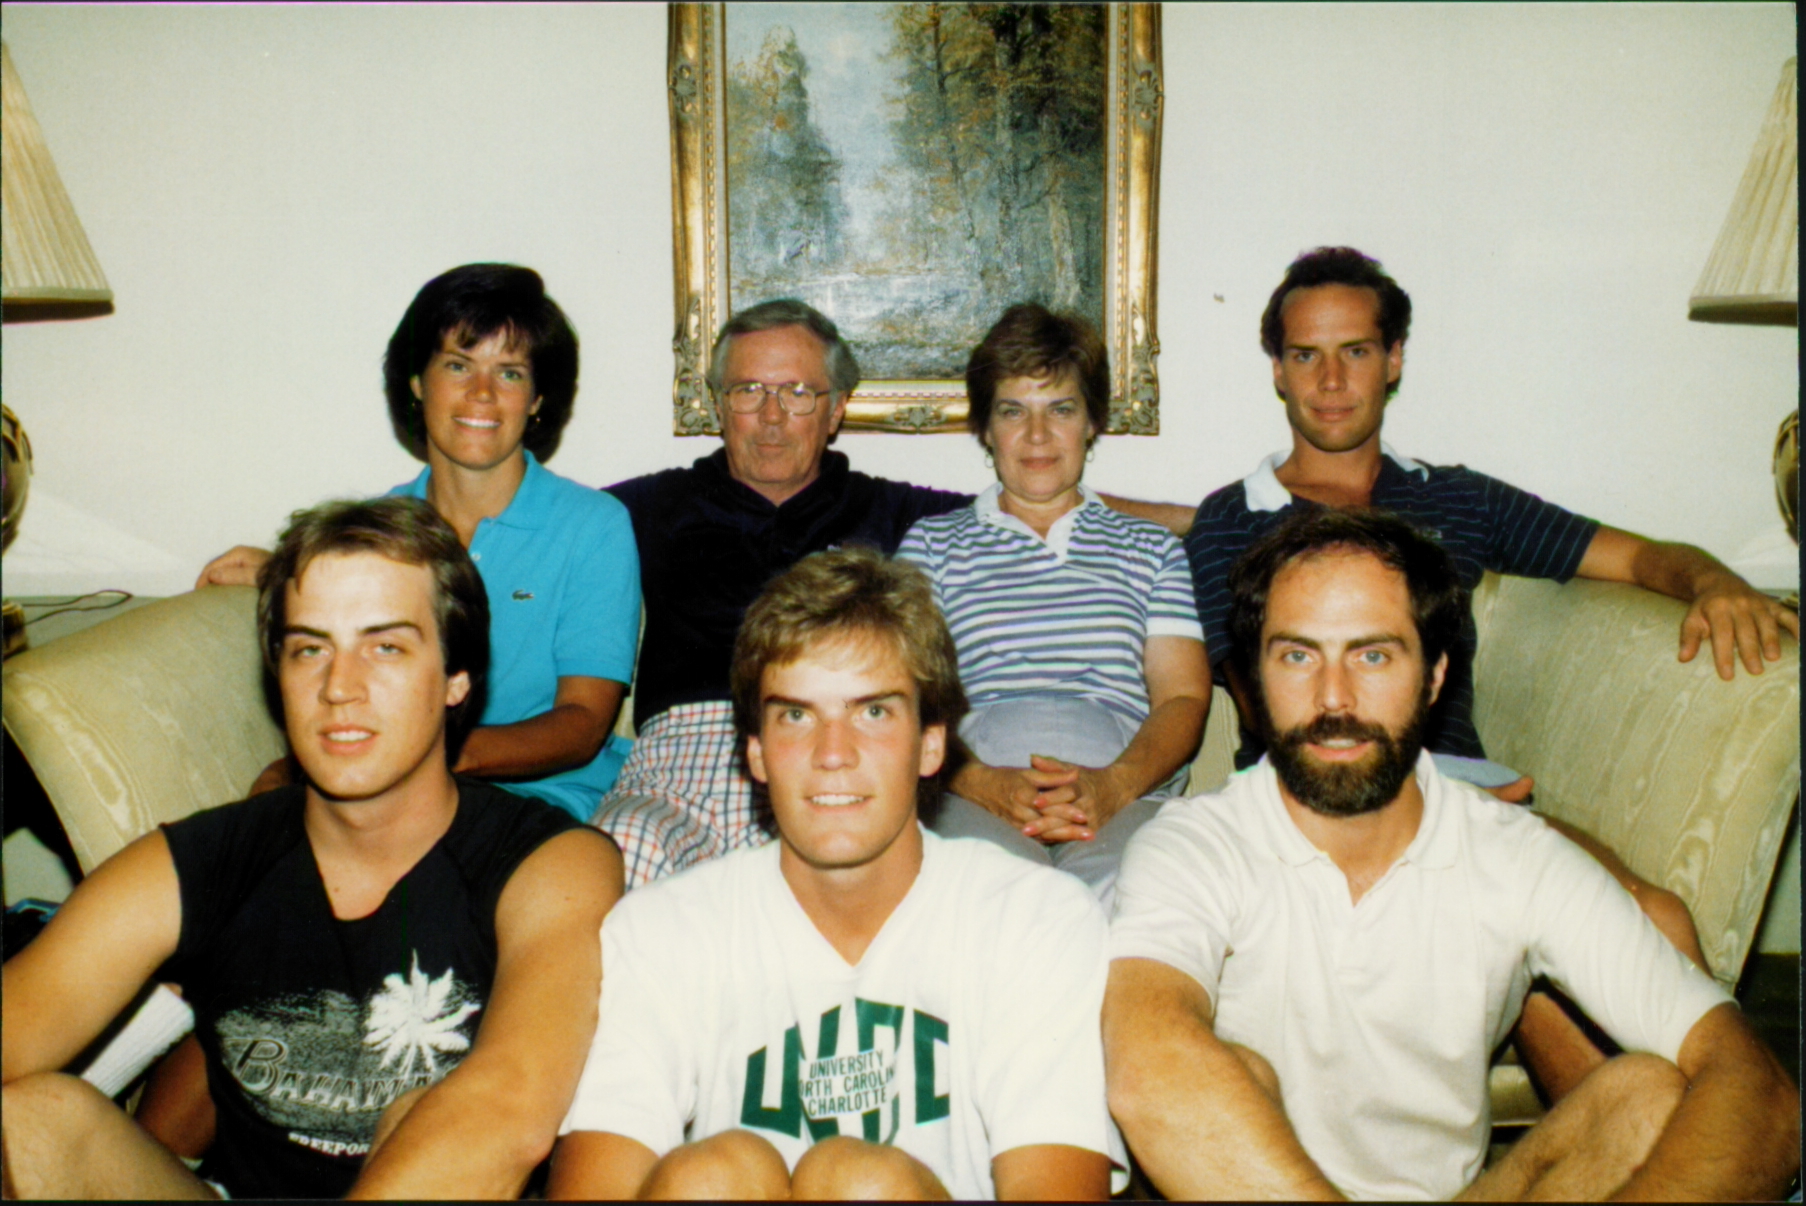 Jeff Rowe (bottom right) with his parents and four siblings. This photo was taken just prior to Frank’s ALS diagnosis (pictured top row second from the left).